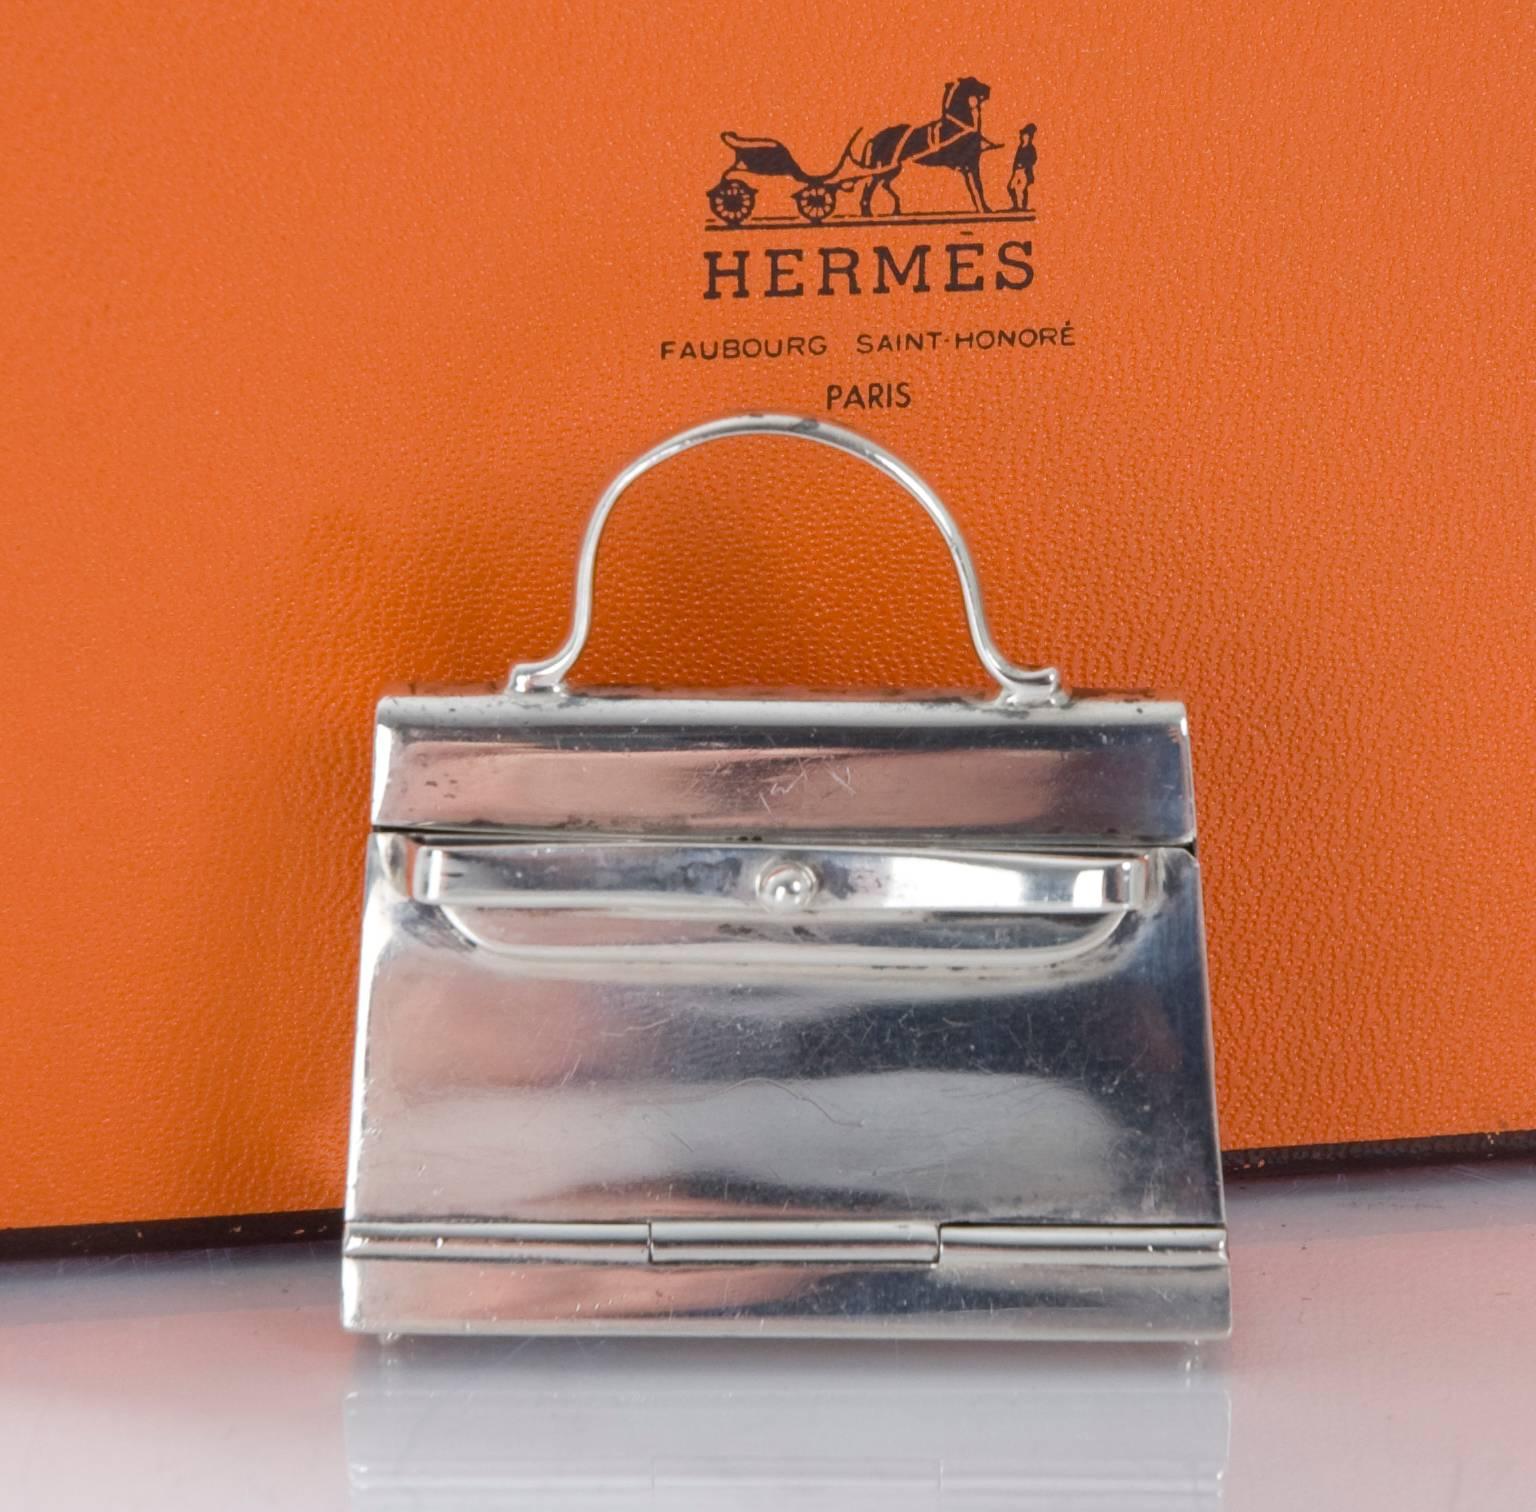 HERMES Paris Pill Box in  925 Sterling Silver styled as a 'Kelly' Handbag.  Opens by pull towards front. Silver Stamp is located inside on the bottom.
No original packaging,but comes in a small Hermes box.
Some small scratches and marks and the